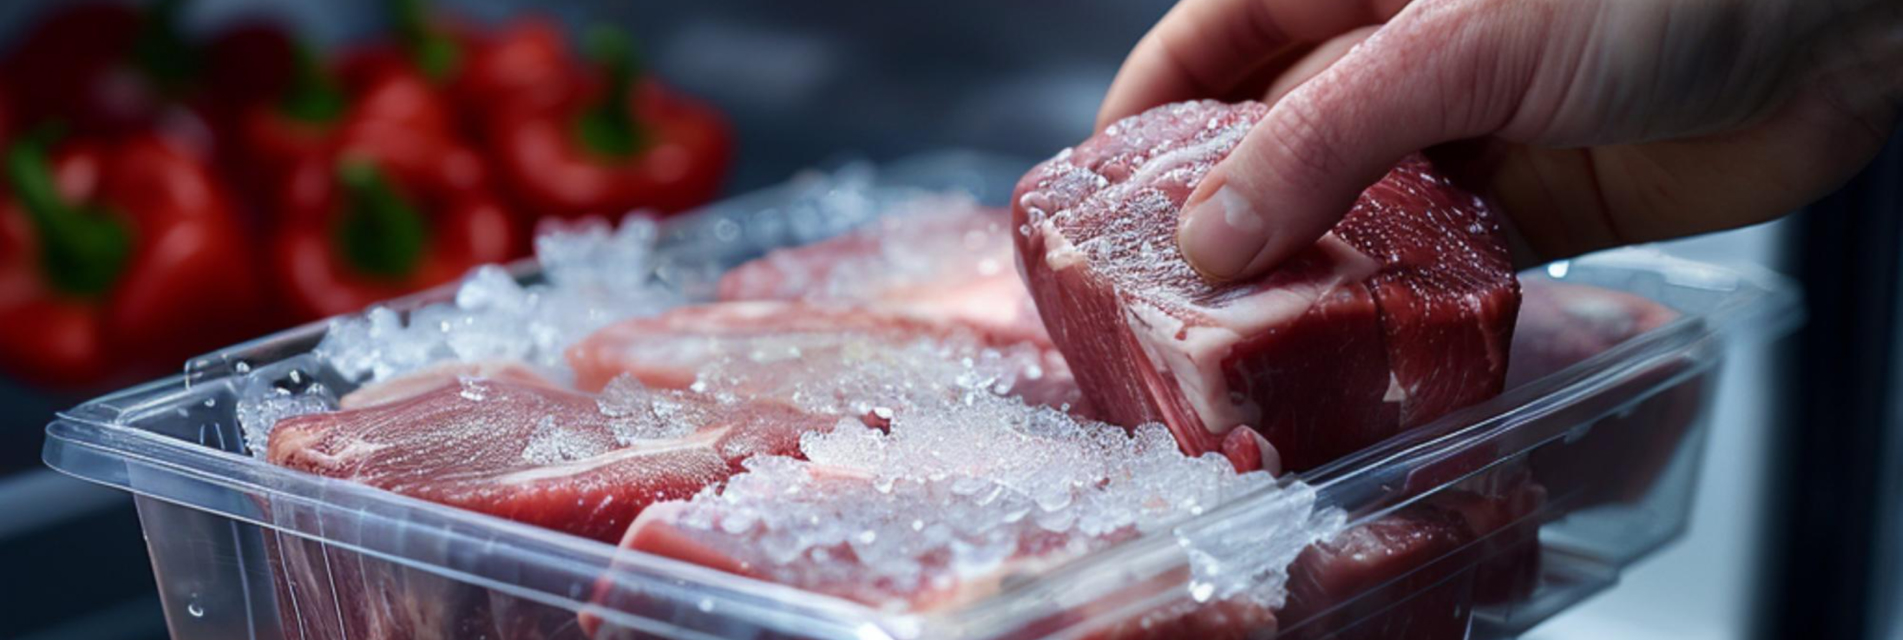 Is It OK To Refreeze Meat?